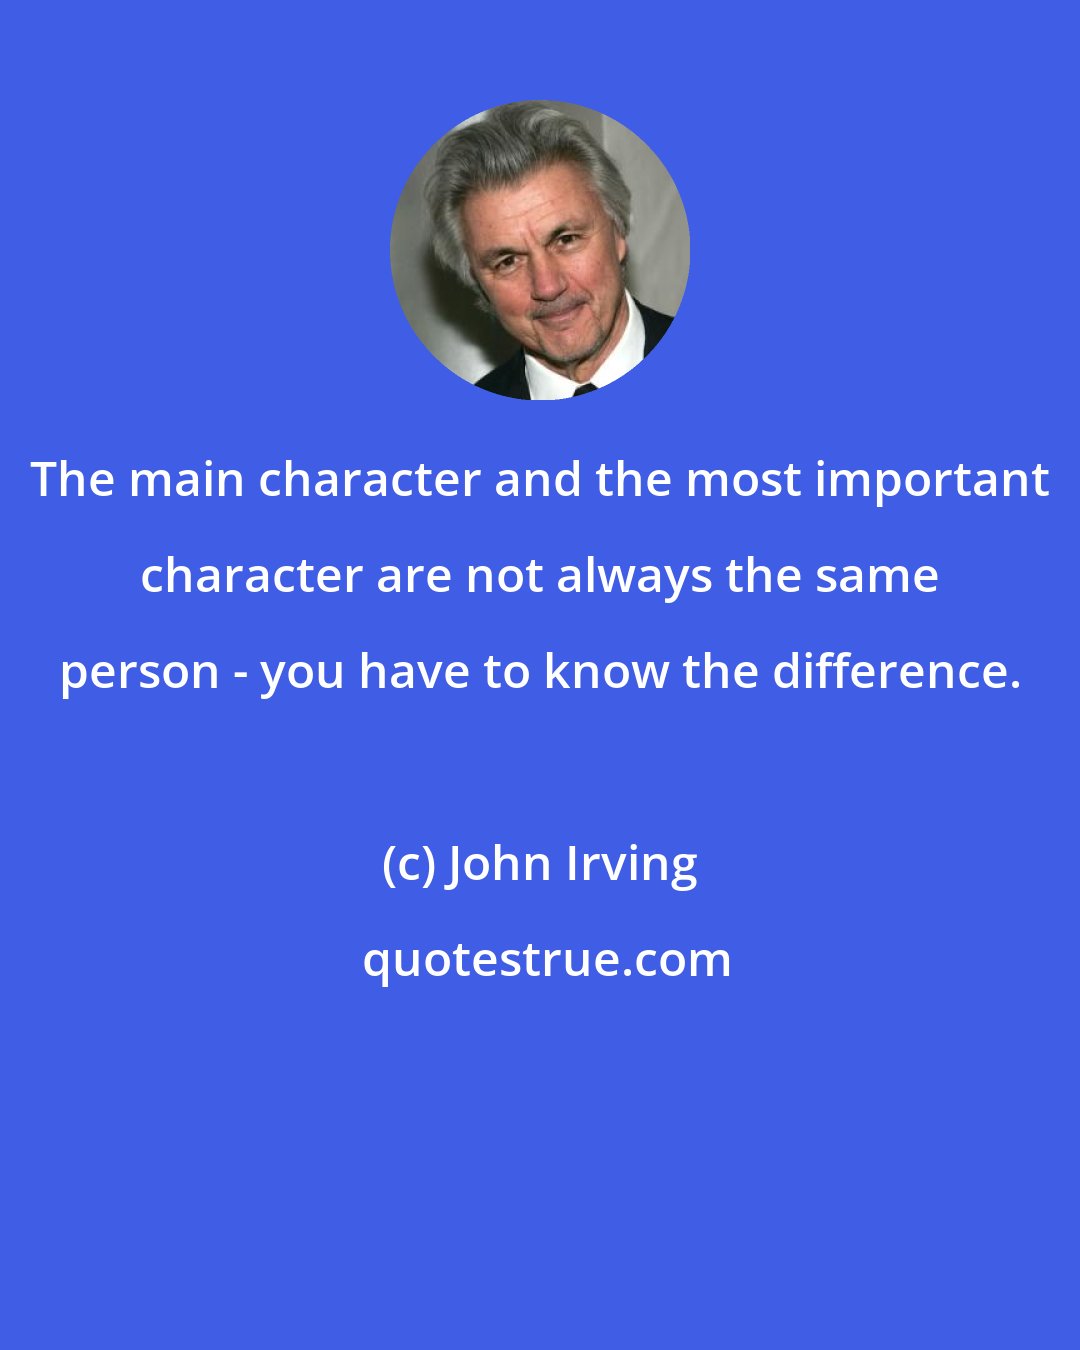 John Irving: The main character and the most important character are not always the same person - you have to know the difference.